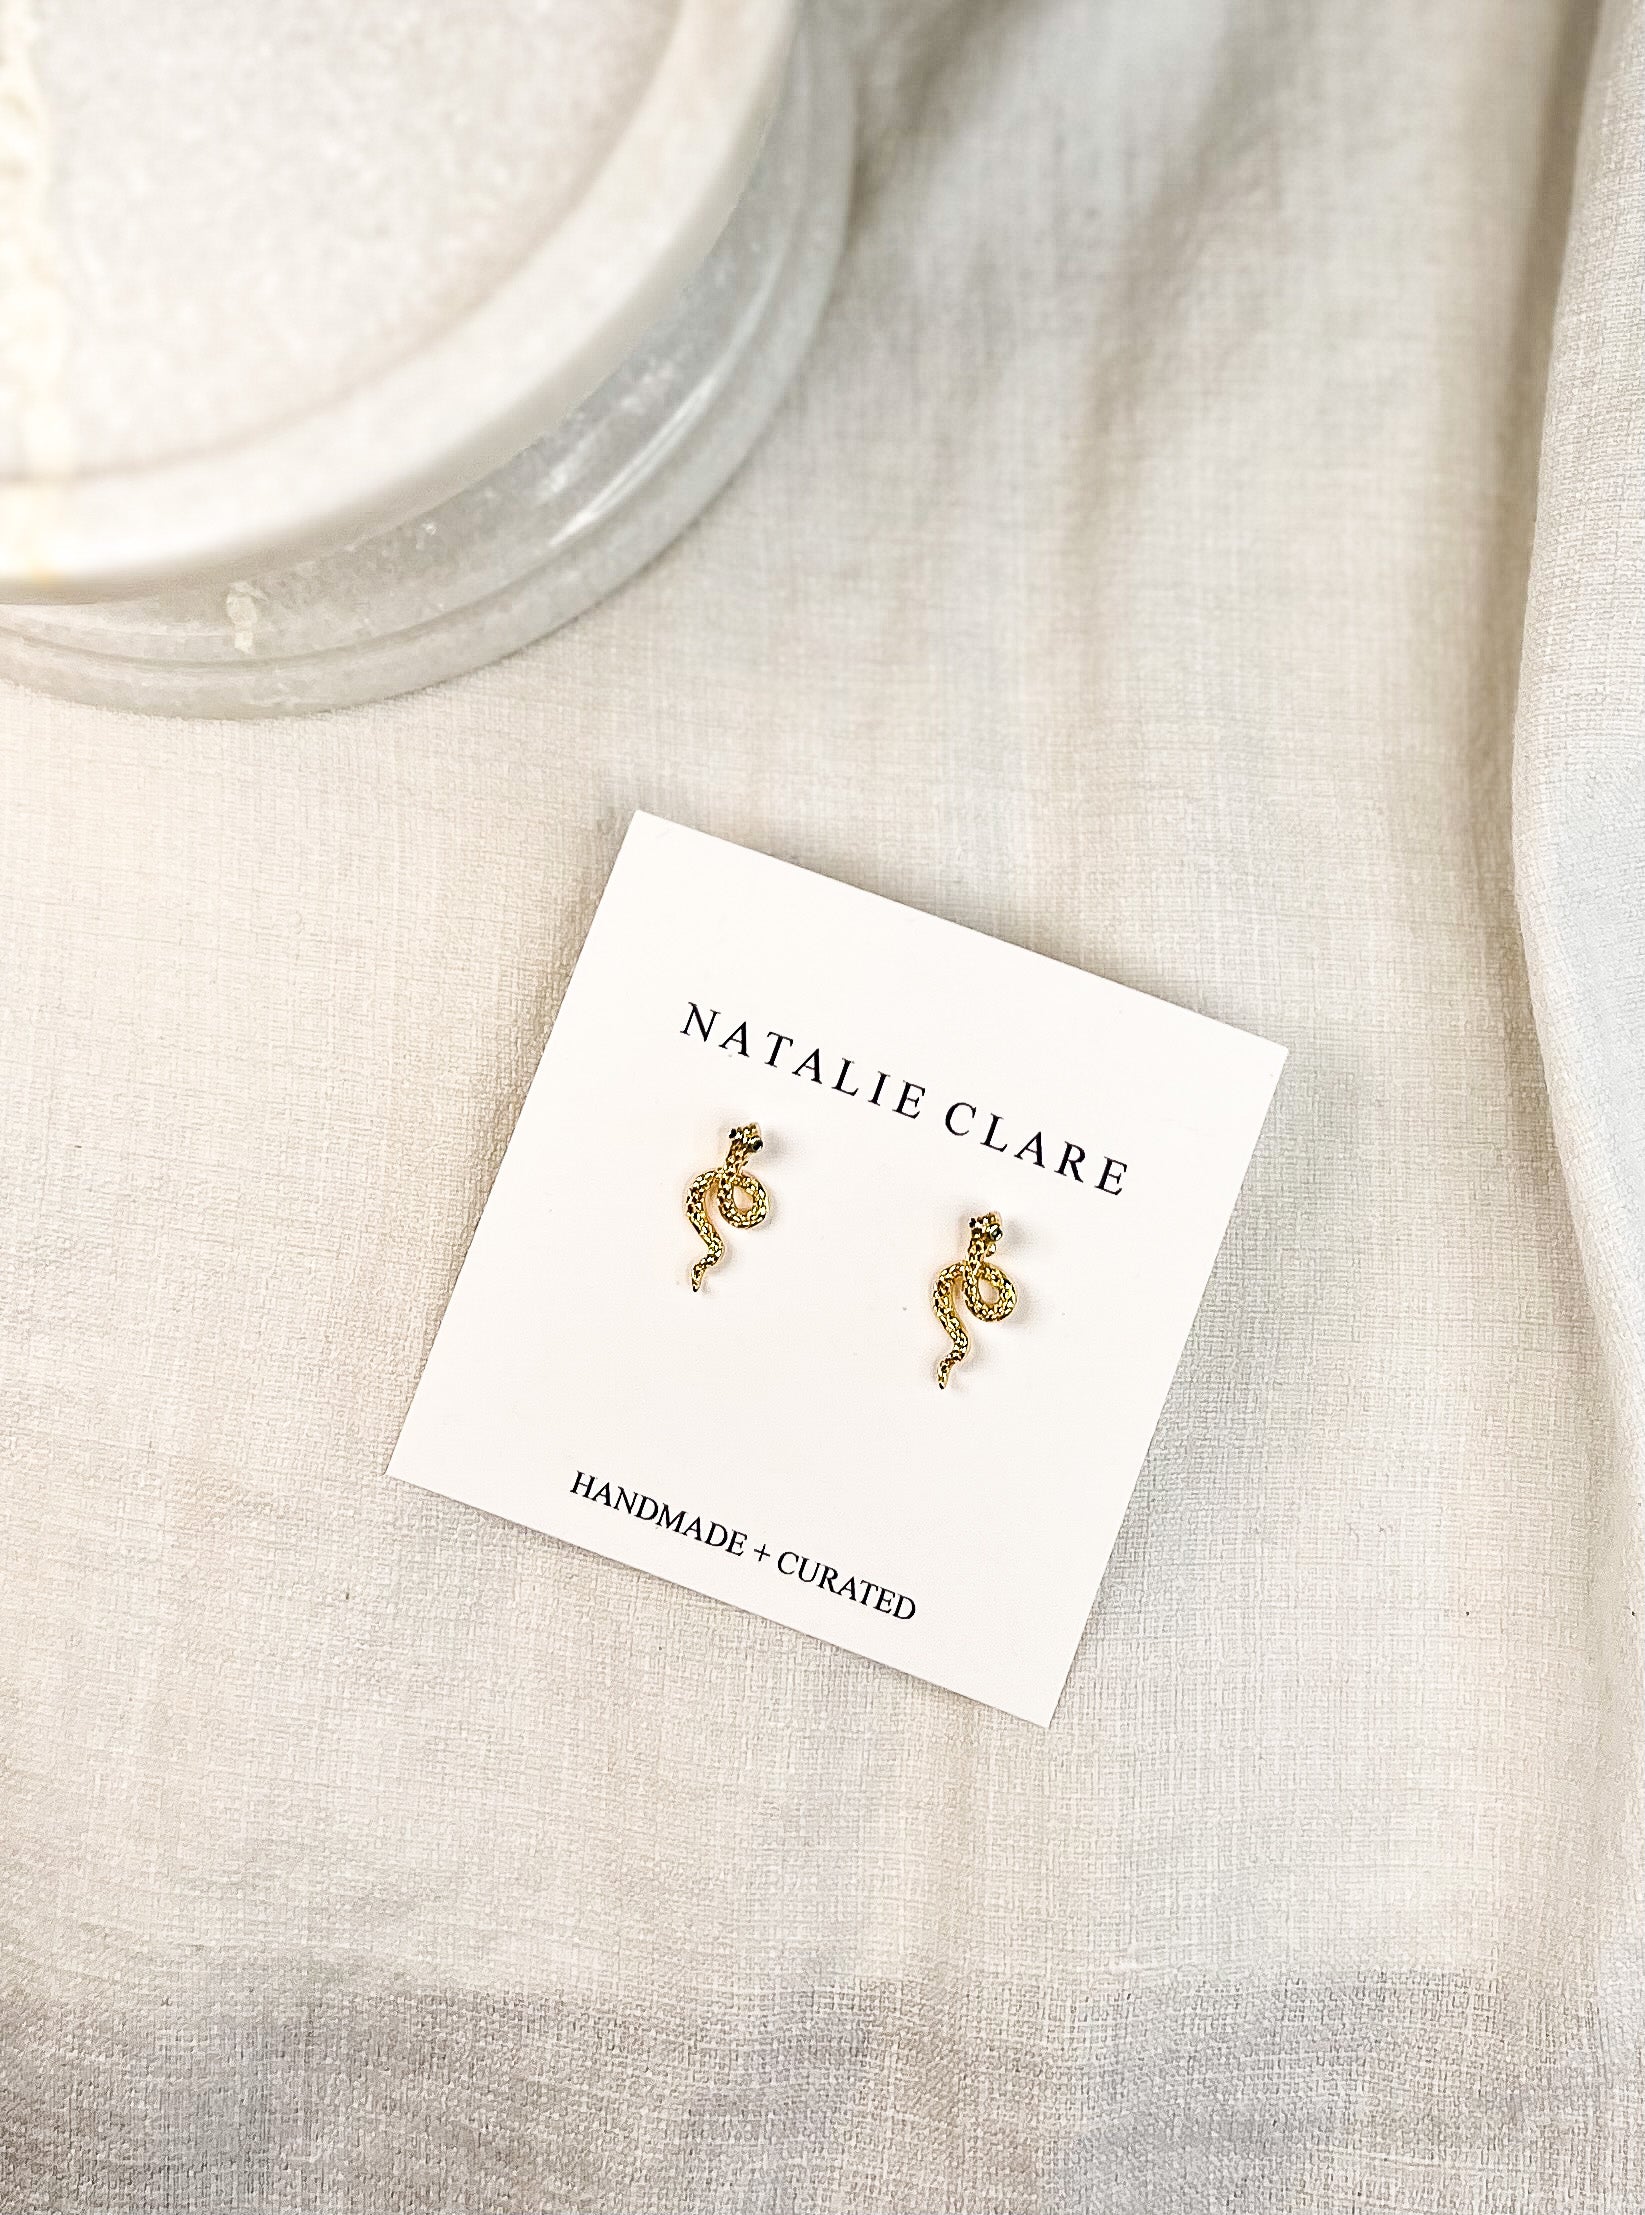 Gold Hashtag Stud Earrings, Gold Hashtag Earrings, Unique Stud Earrings  Gold, Cubic Zircon Earrings, Cartilage Piercing Gold, Hashtag Sign - Etsy